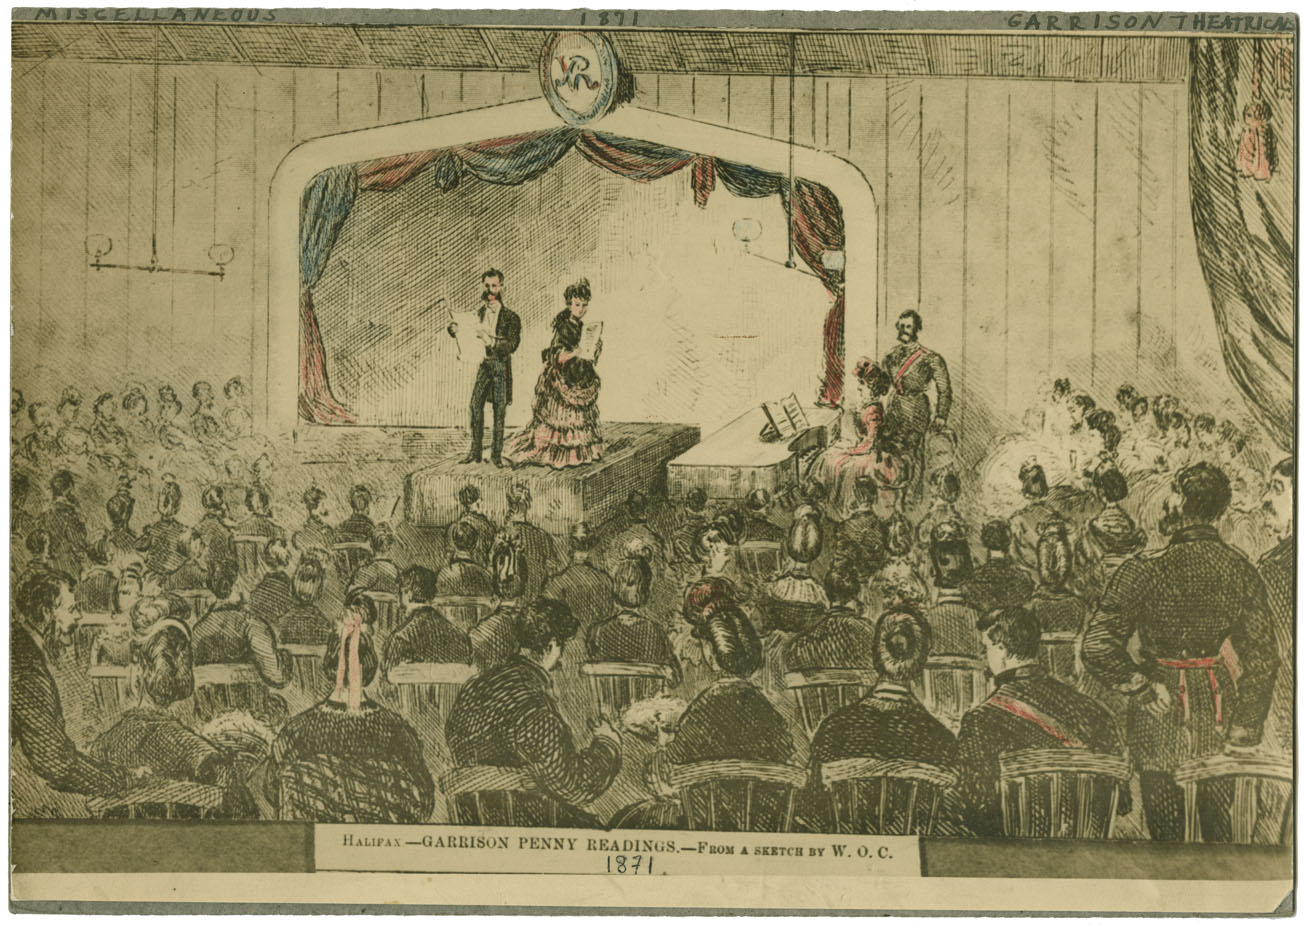 photocollection : Miscellaneous: Theatre: Halifax - Garrison Penny Readings, from a Sketch by W. O. C.